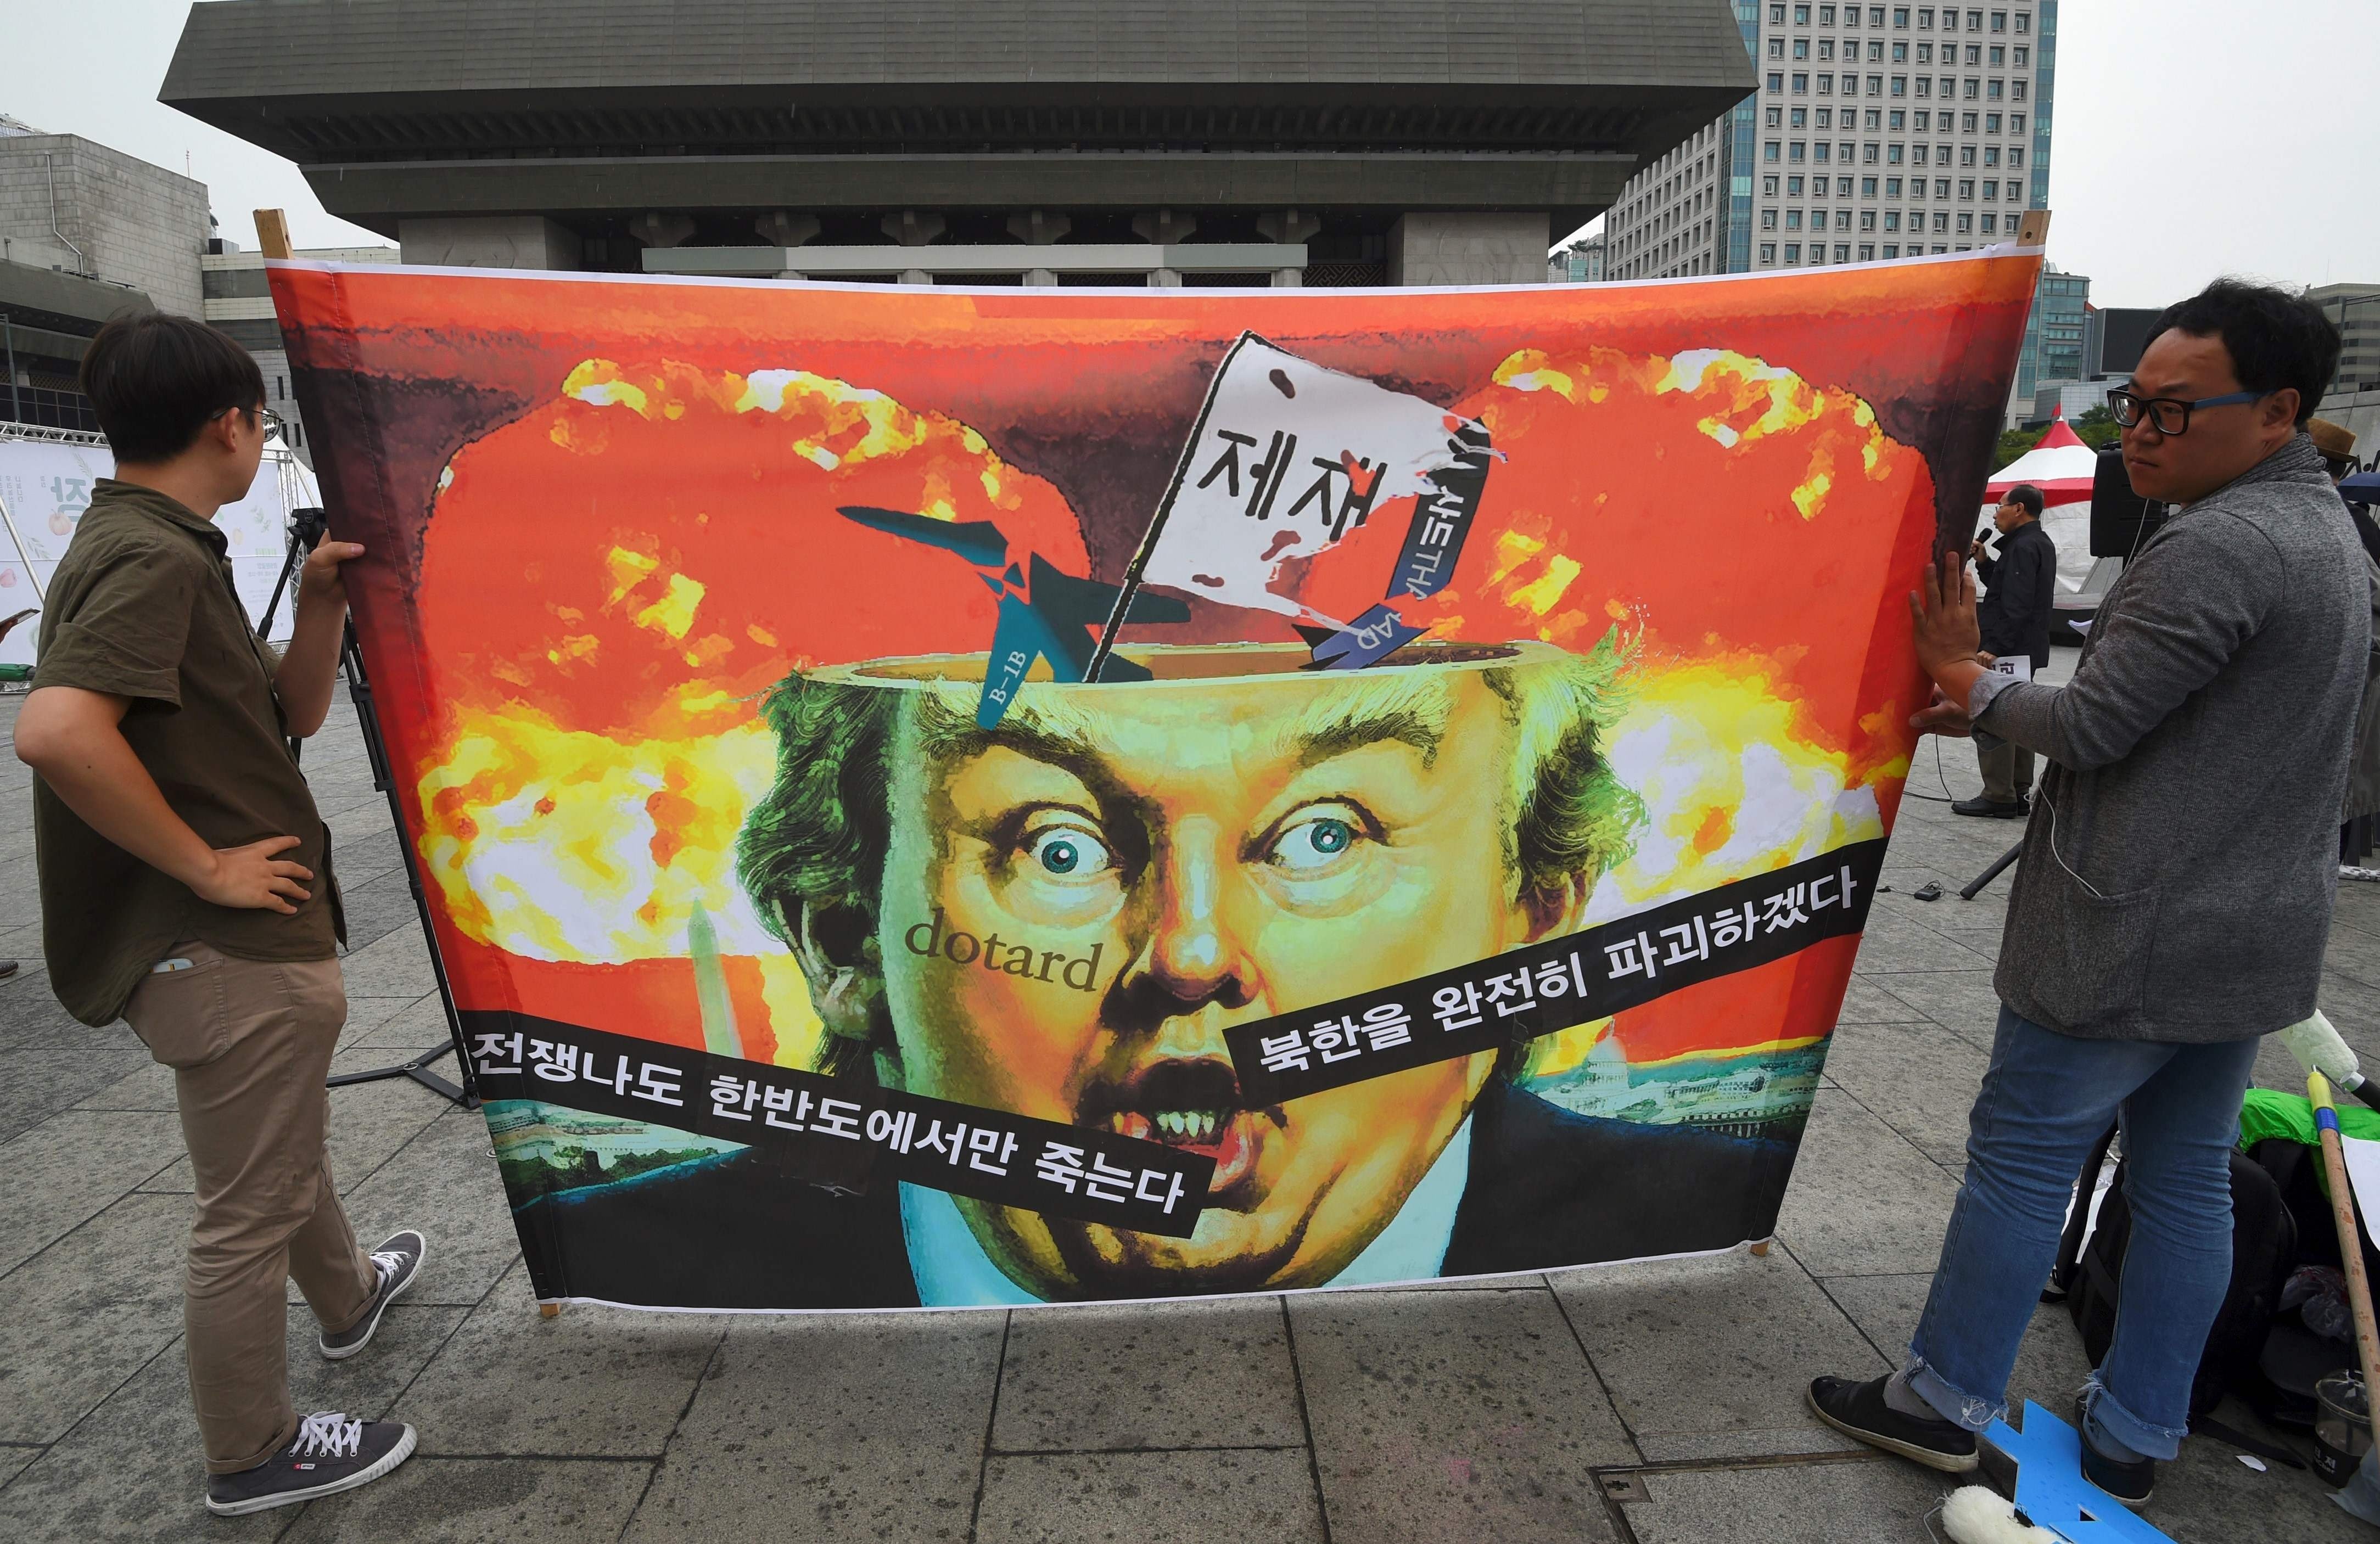 Anti-war activists hold a banner showing a caricature of US President Donald Trump during a rally near the US embassy in Seoul on September 27. Part of the banner reads, “If war breaks out, only those on the Korean peninsula will die”. Photo: AFP